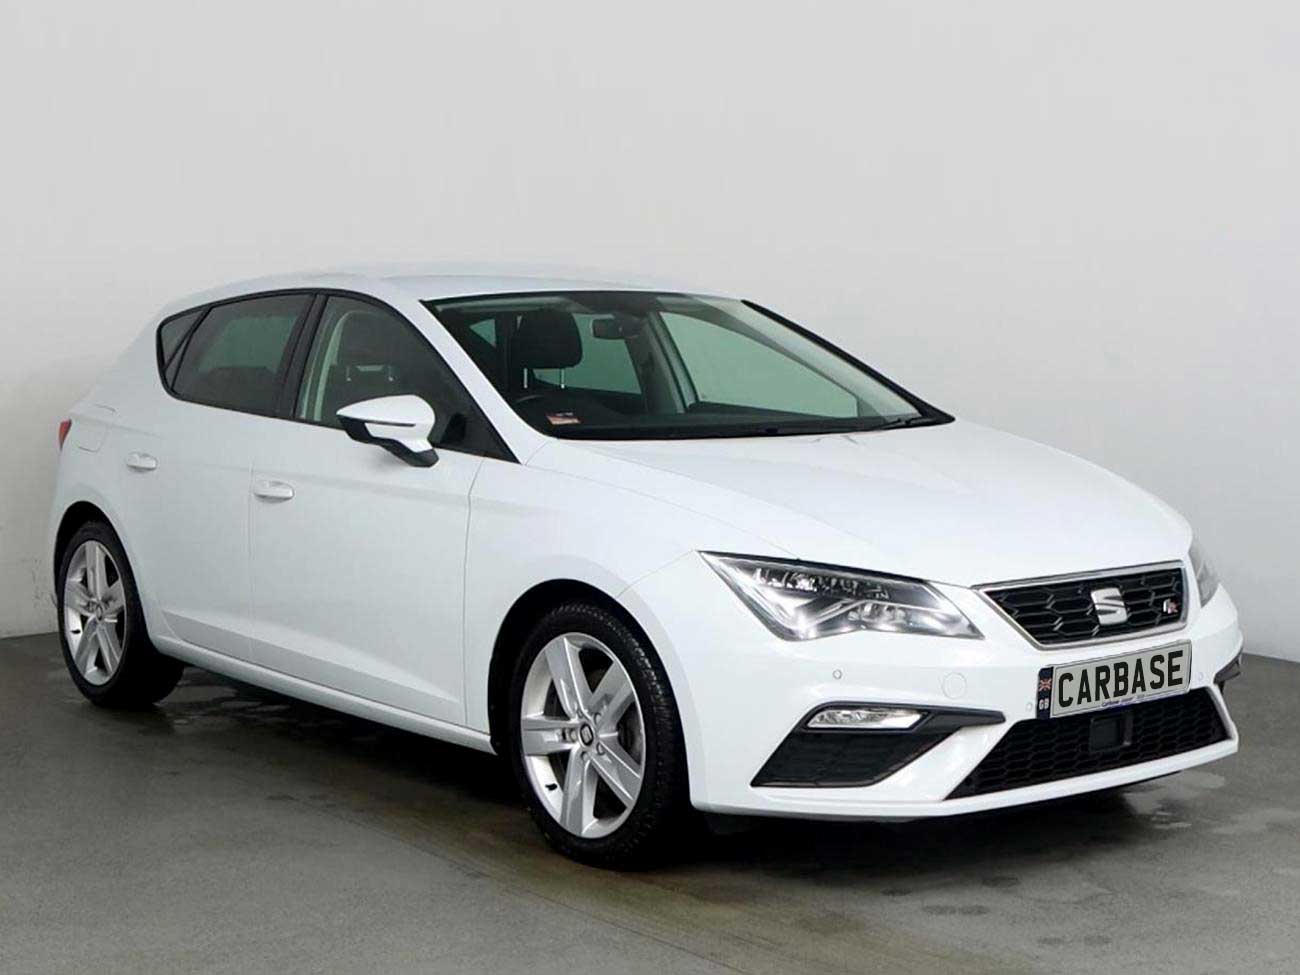 Seat Leon front view in showroom